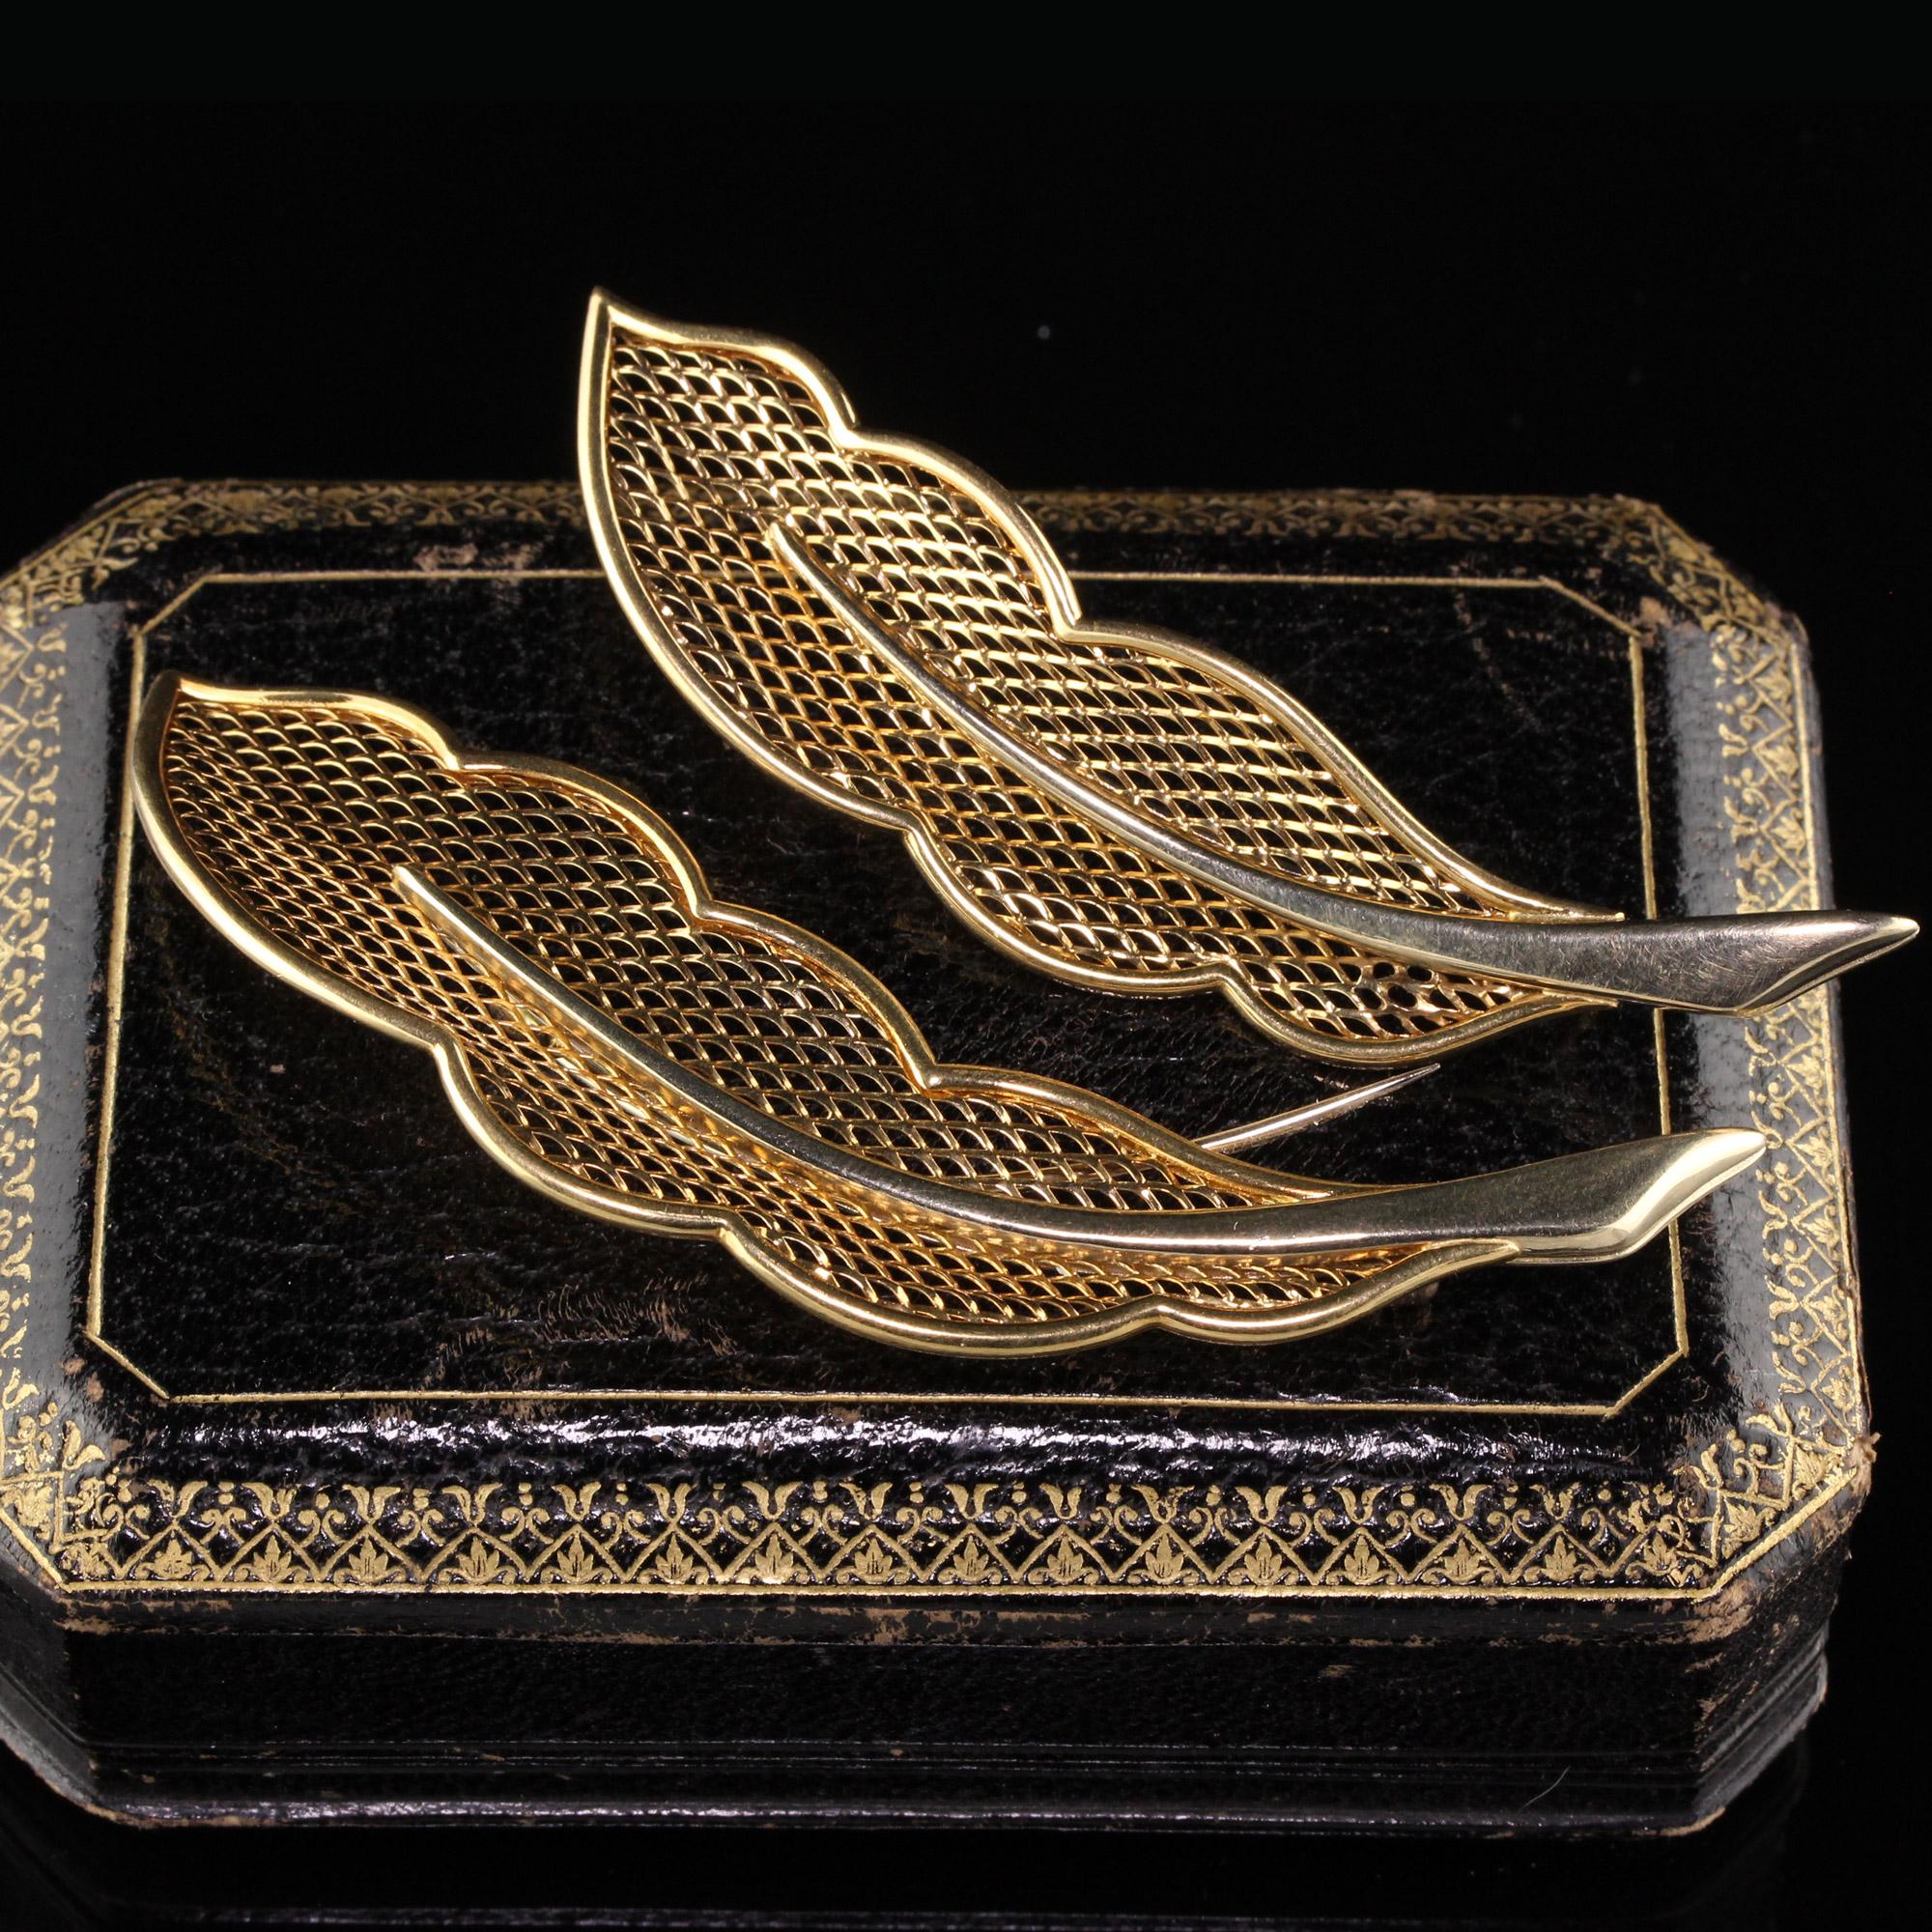 Stunning Van Cleef and Arpels double pin set. 

Metal: 18K Yellow Gold

Weight: 27.0 Grams

Small Feather Measurements: 3.0 in x 0.76 in

Big Feather Measurements: 3.5 in x 0.88 in